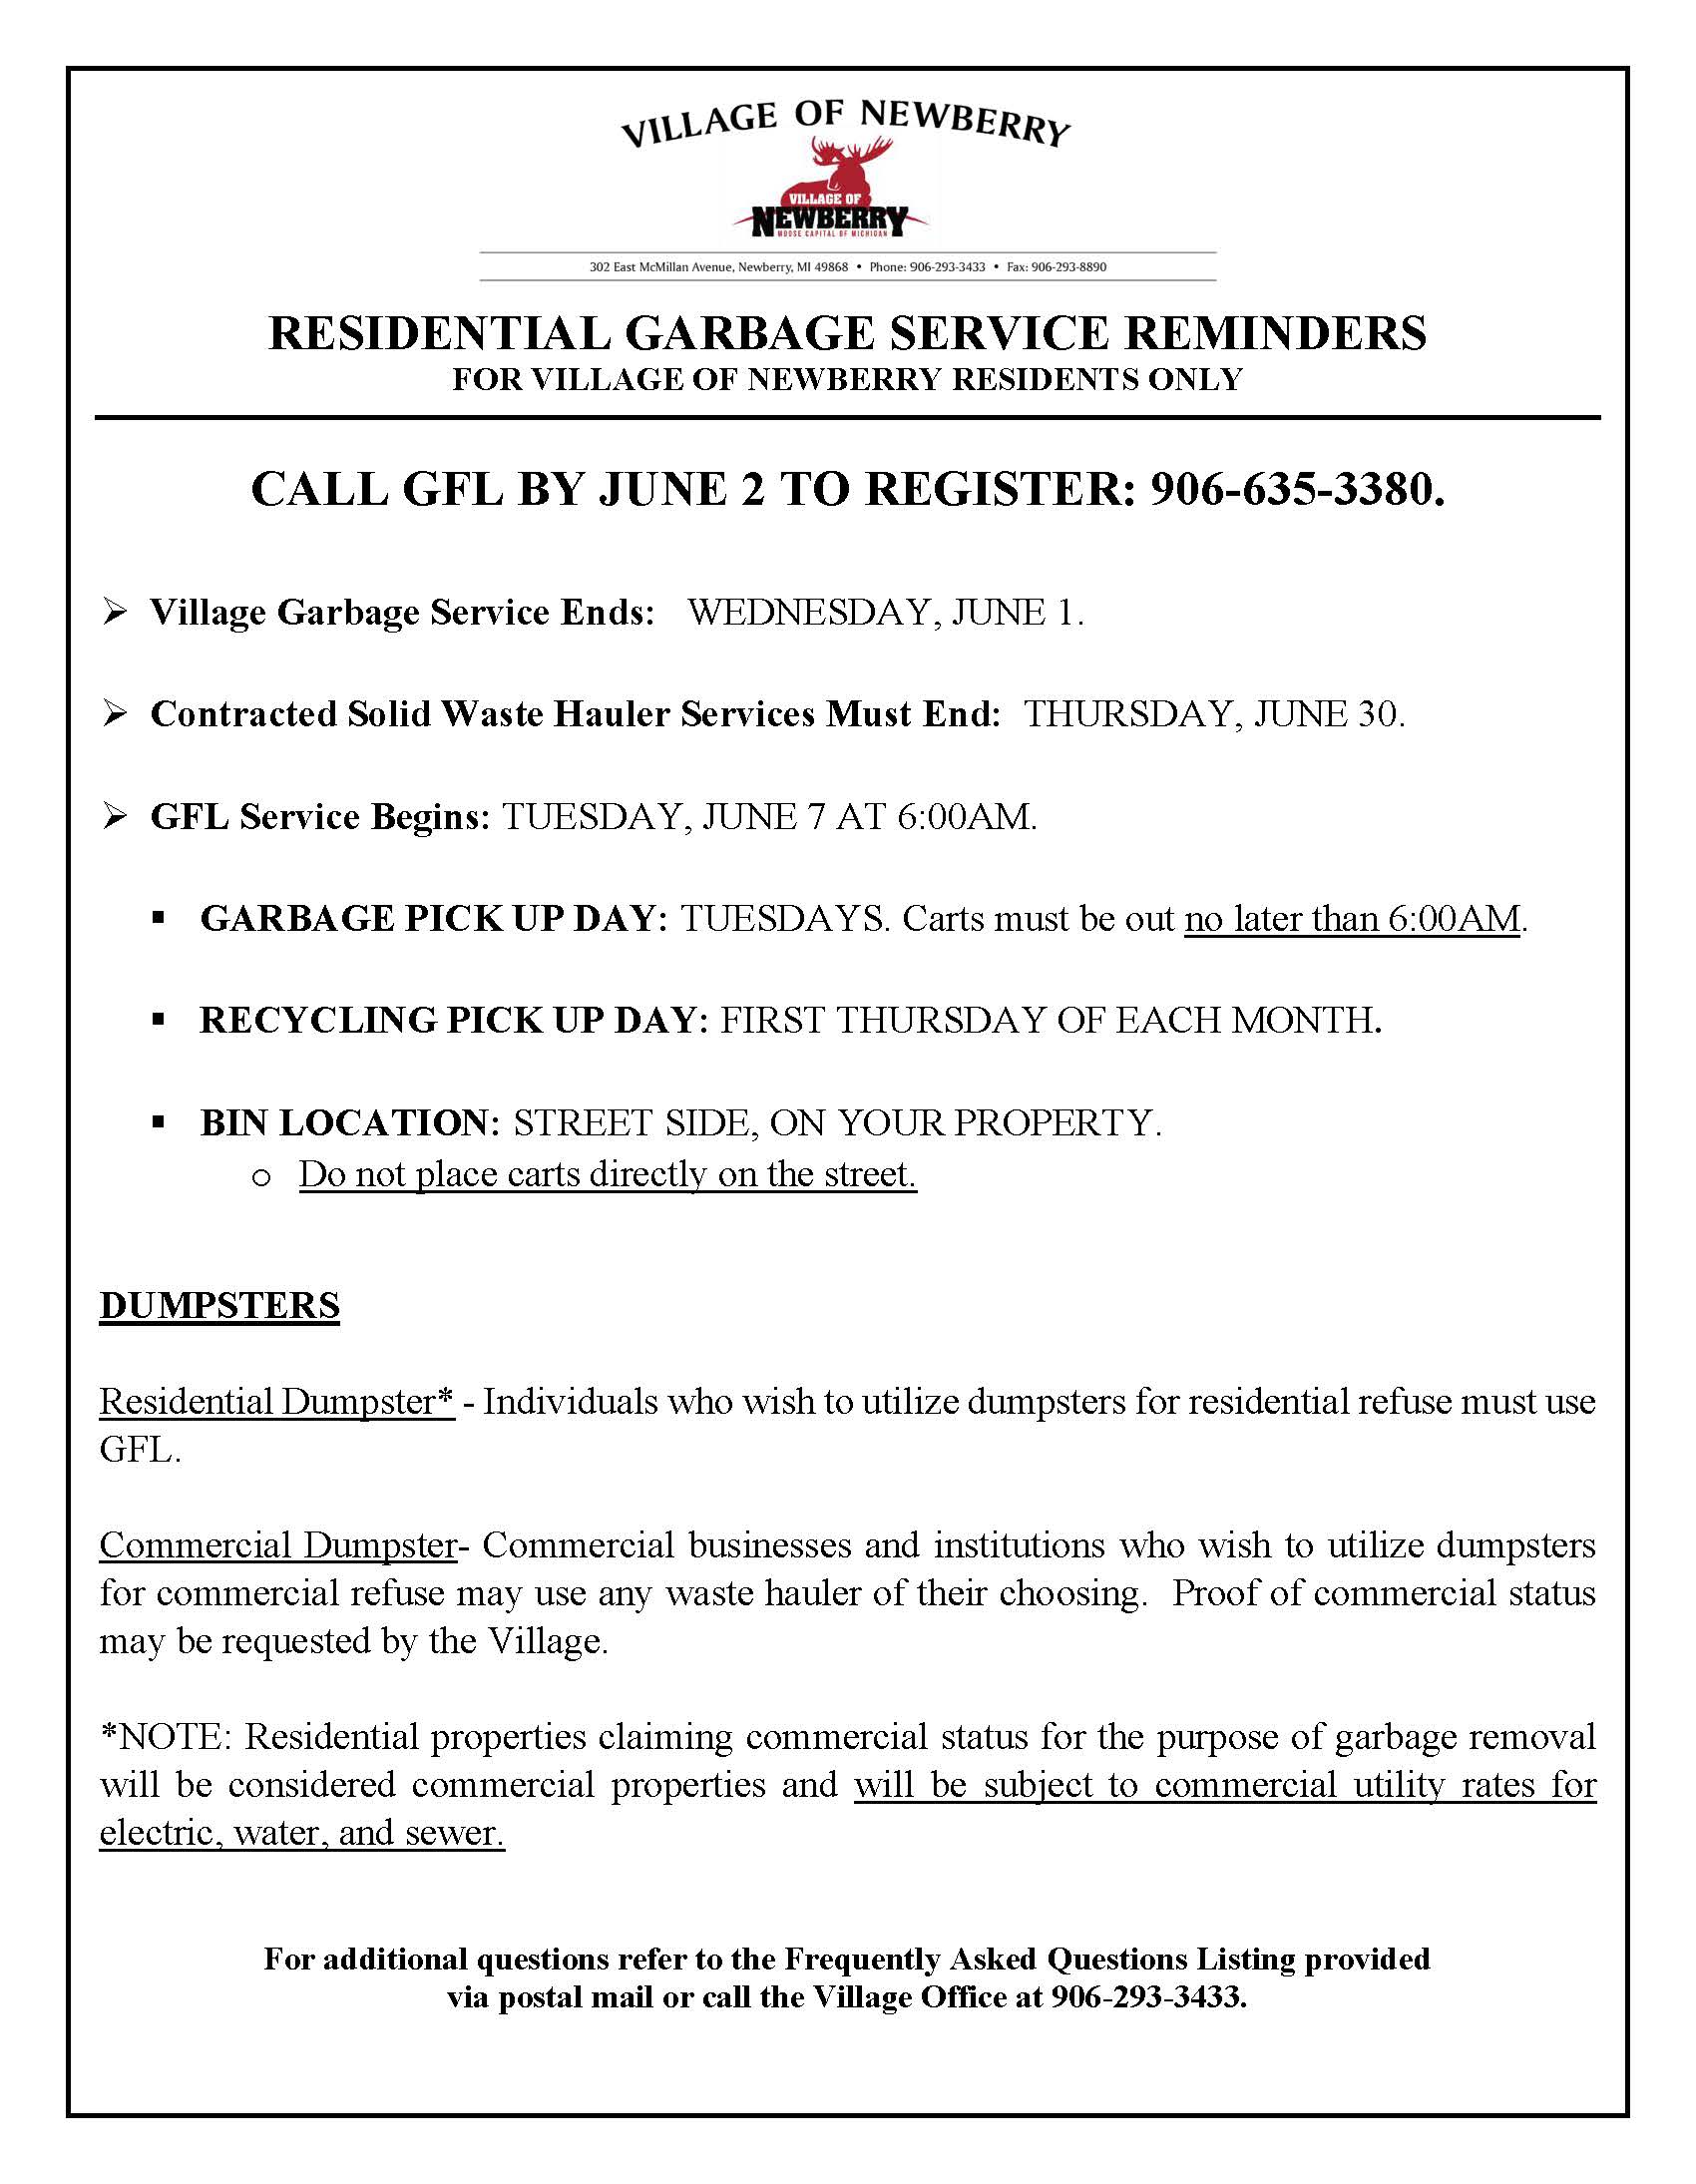 Garbage phase out reminder flyer for residents May 10 2022